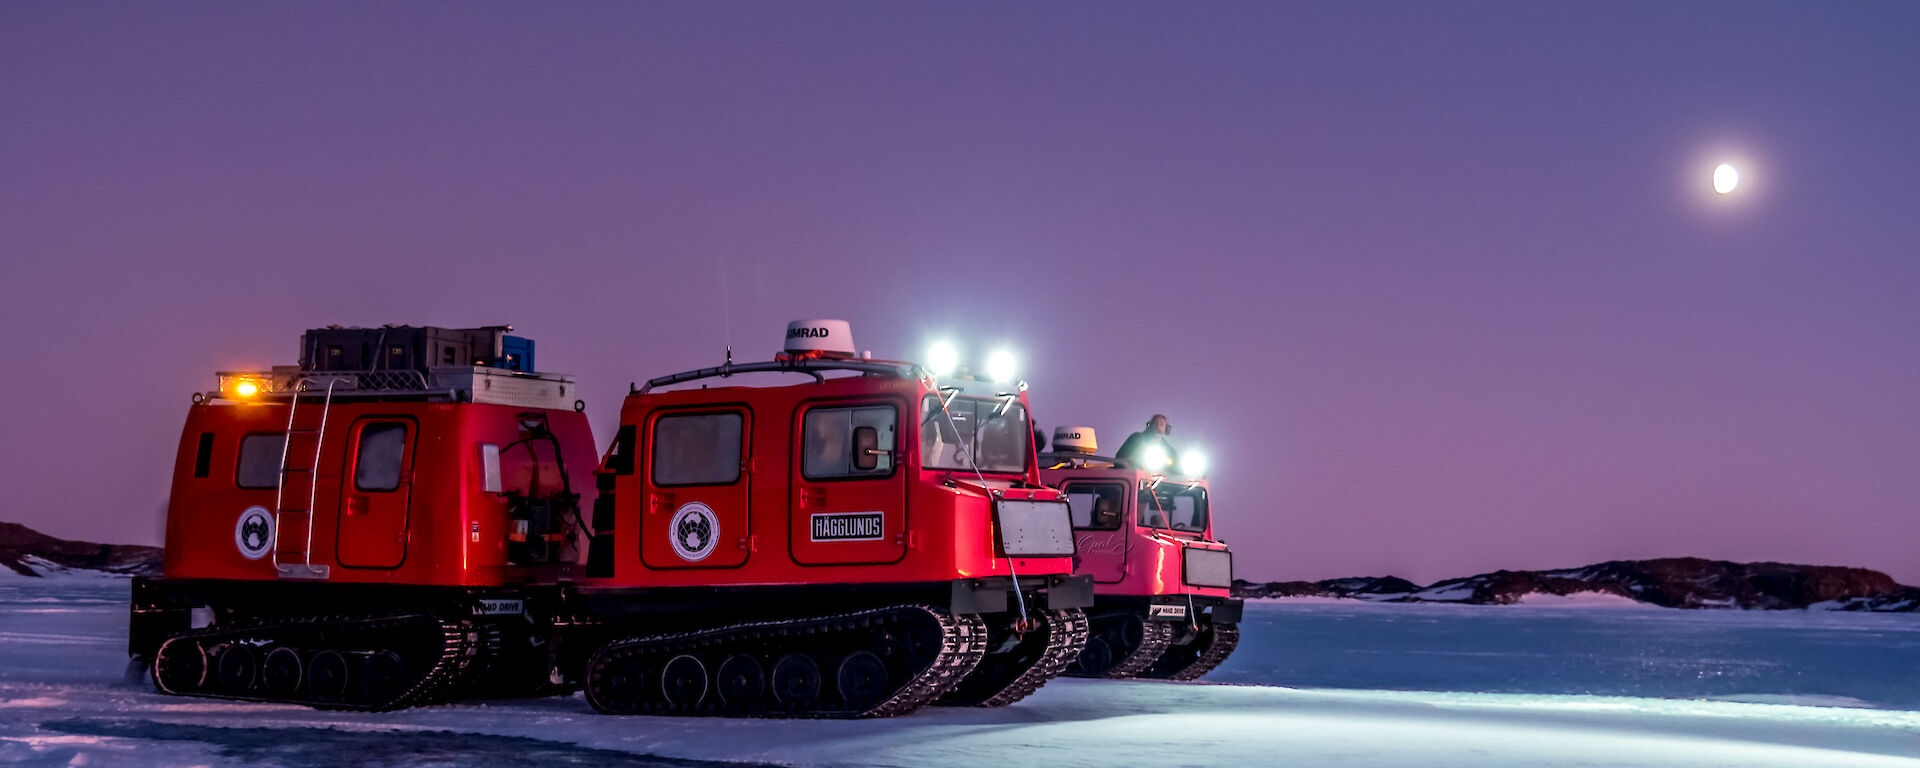 Red and pink Hägglunds vehicles on the sea ice with headlights on and the moon in the distant sky.